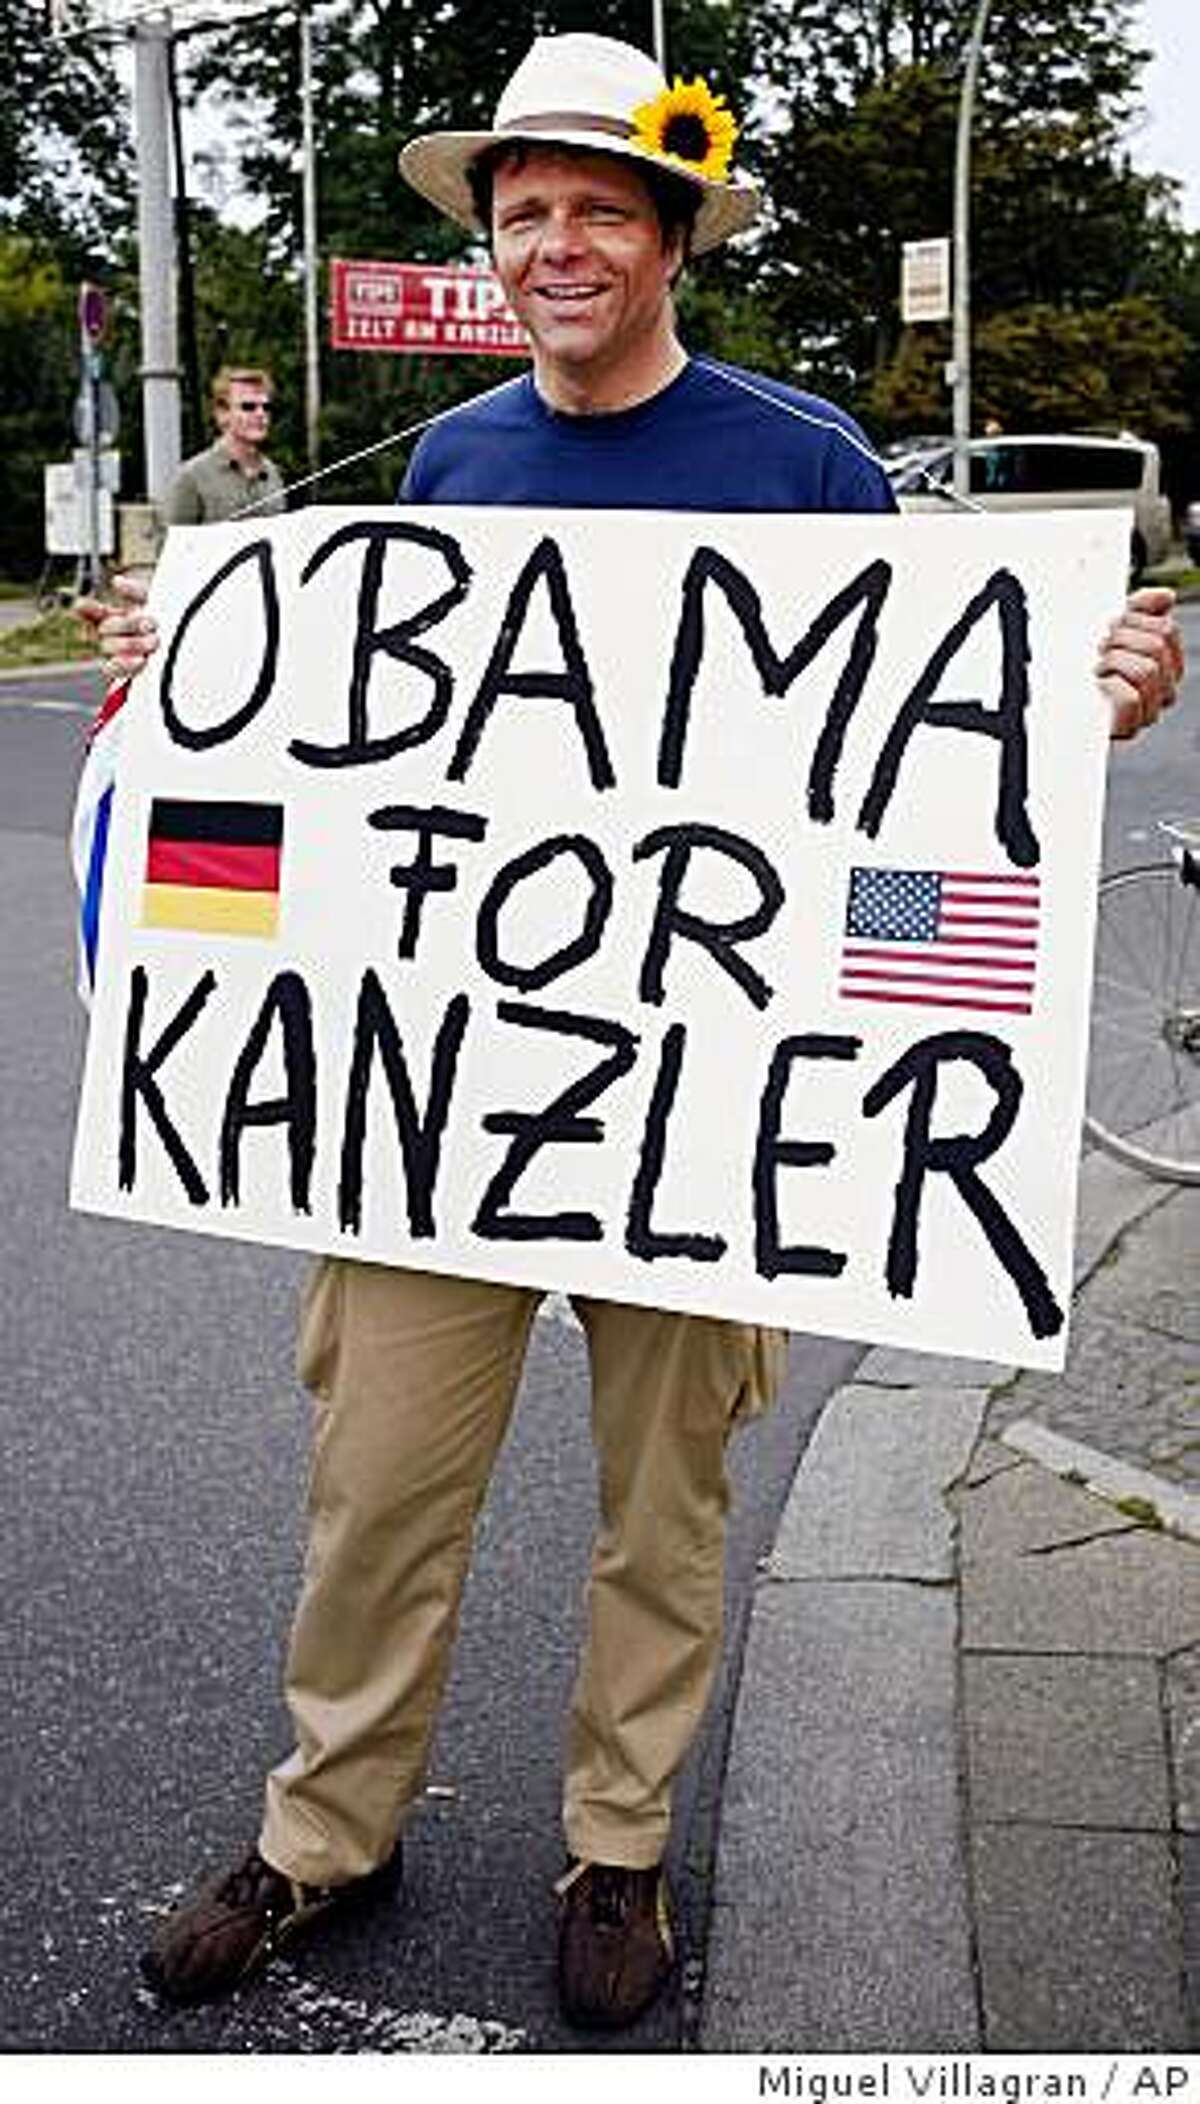 A supporter of U.S. Democratic presidential candidate Sen. Barack Obama, D-Ill., holds a poster meaning "Obama for Chancellor" prior to Obama's speech at the victory column in Berlin Thursday, July 24, 2008. (AP Photo/Miguel Villagran)